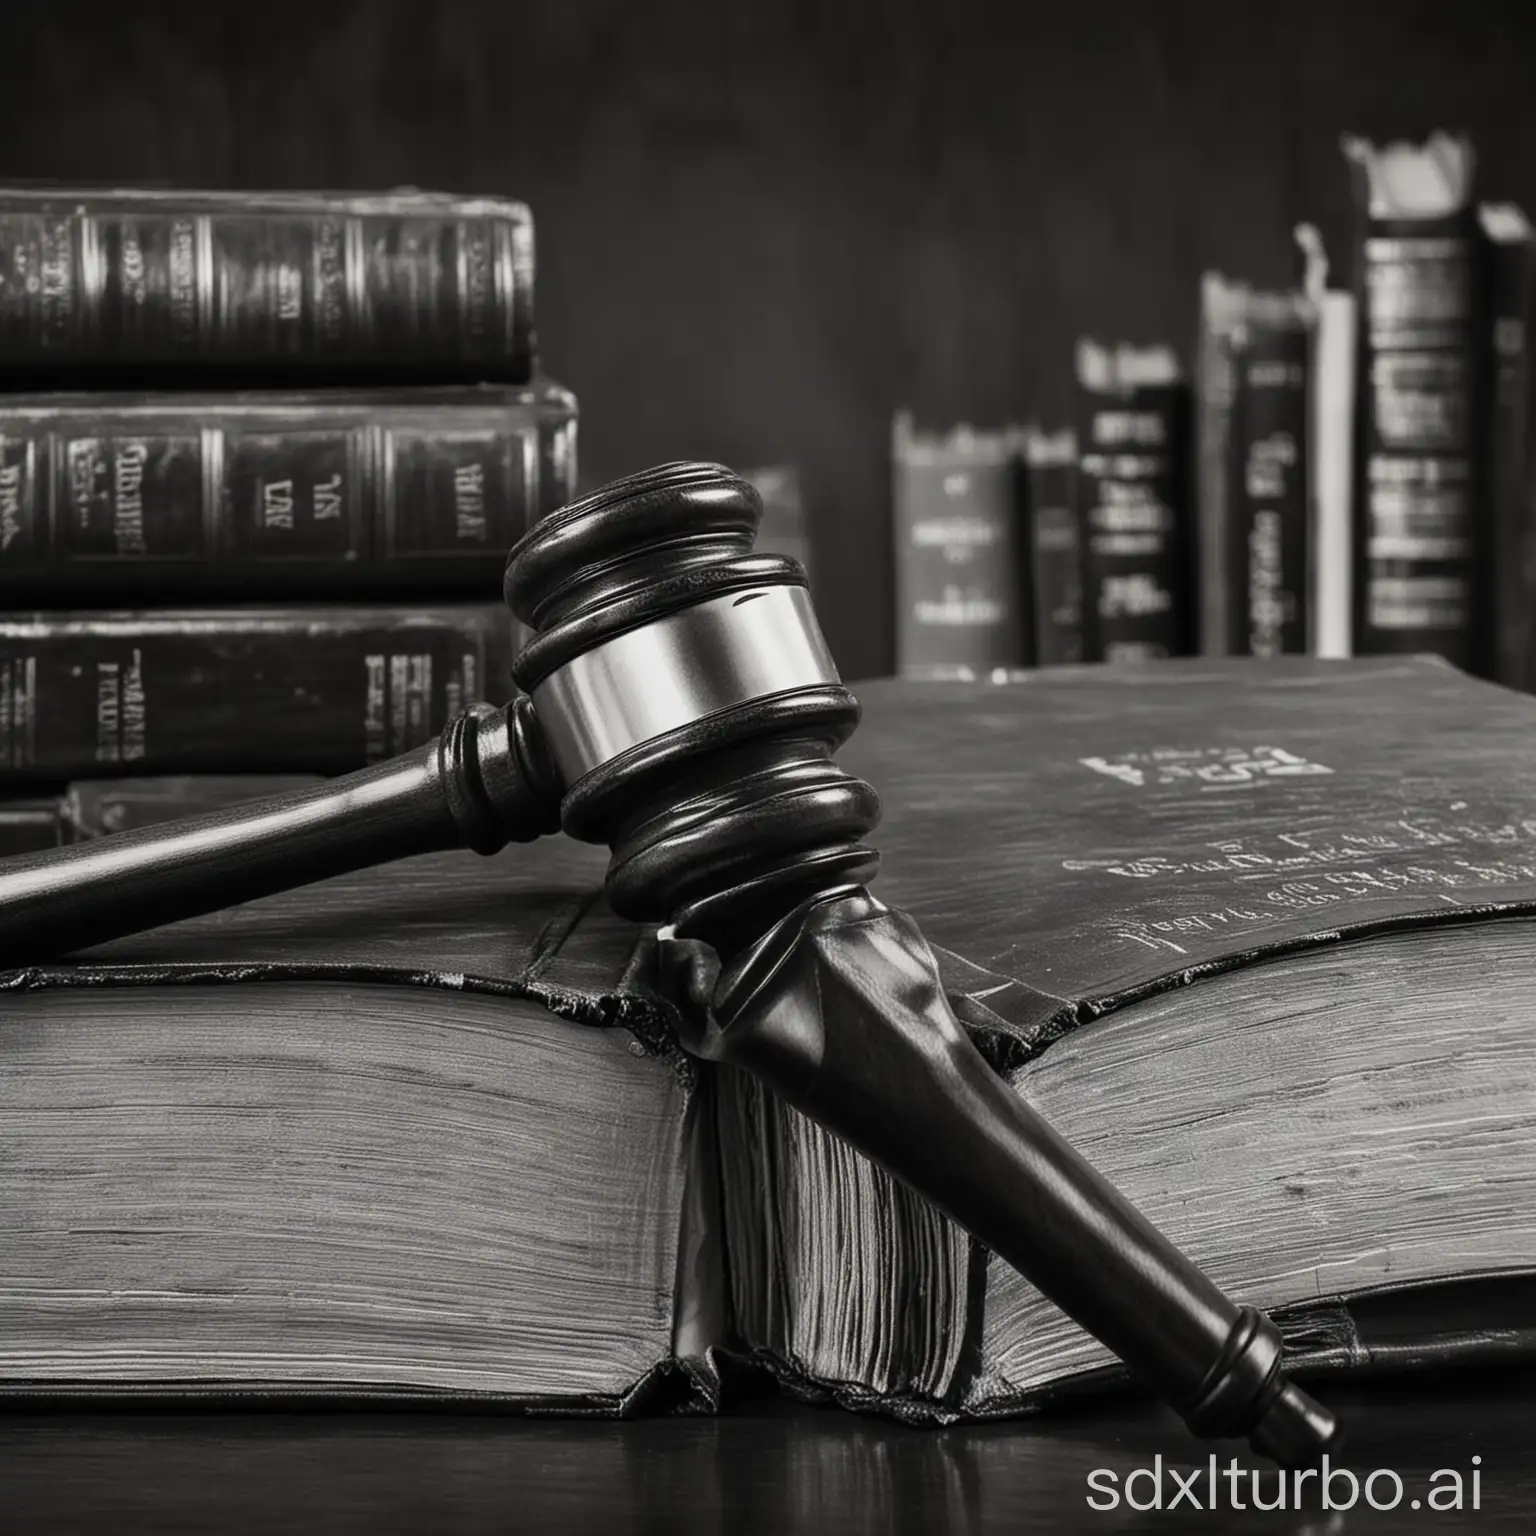 Legal-Gavel-and-Law-Books-Professional-Black-and-White-Composition